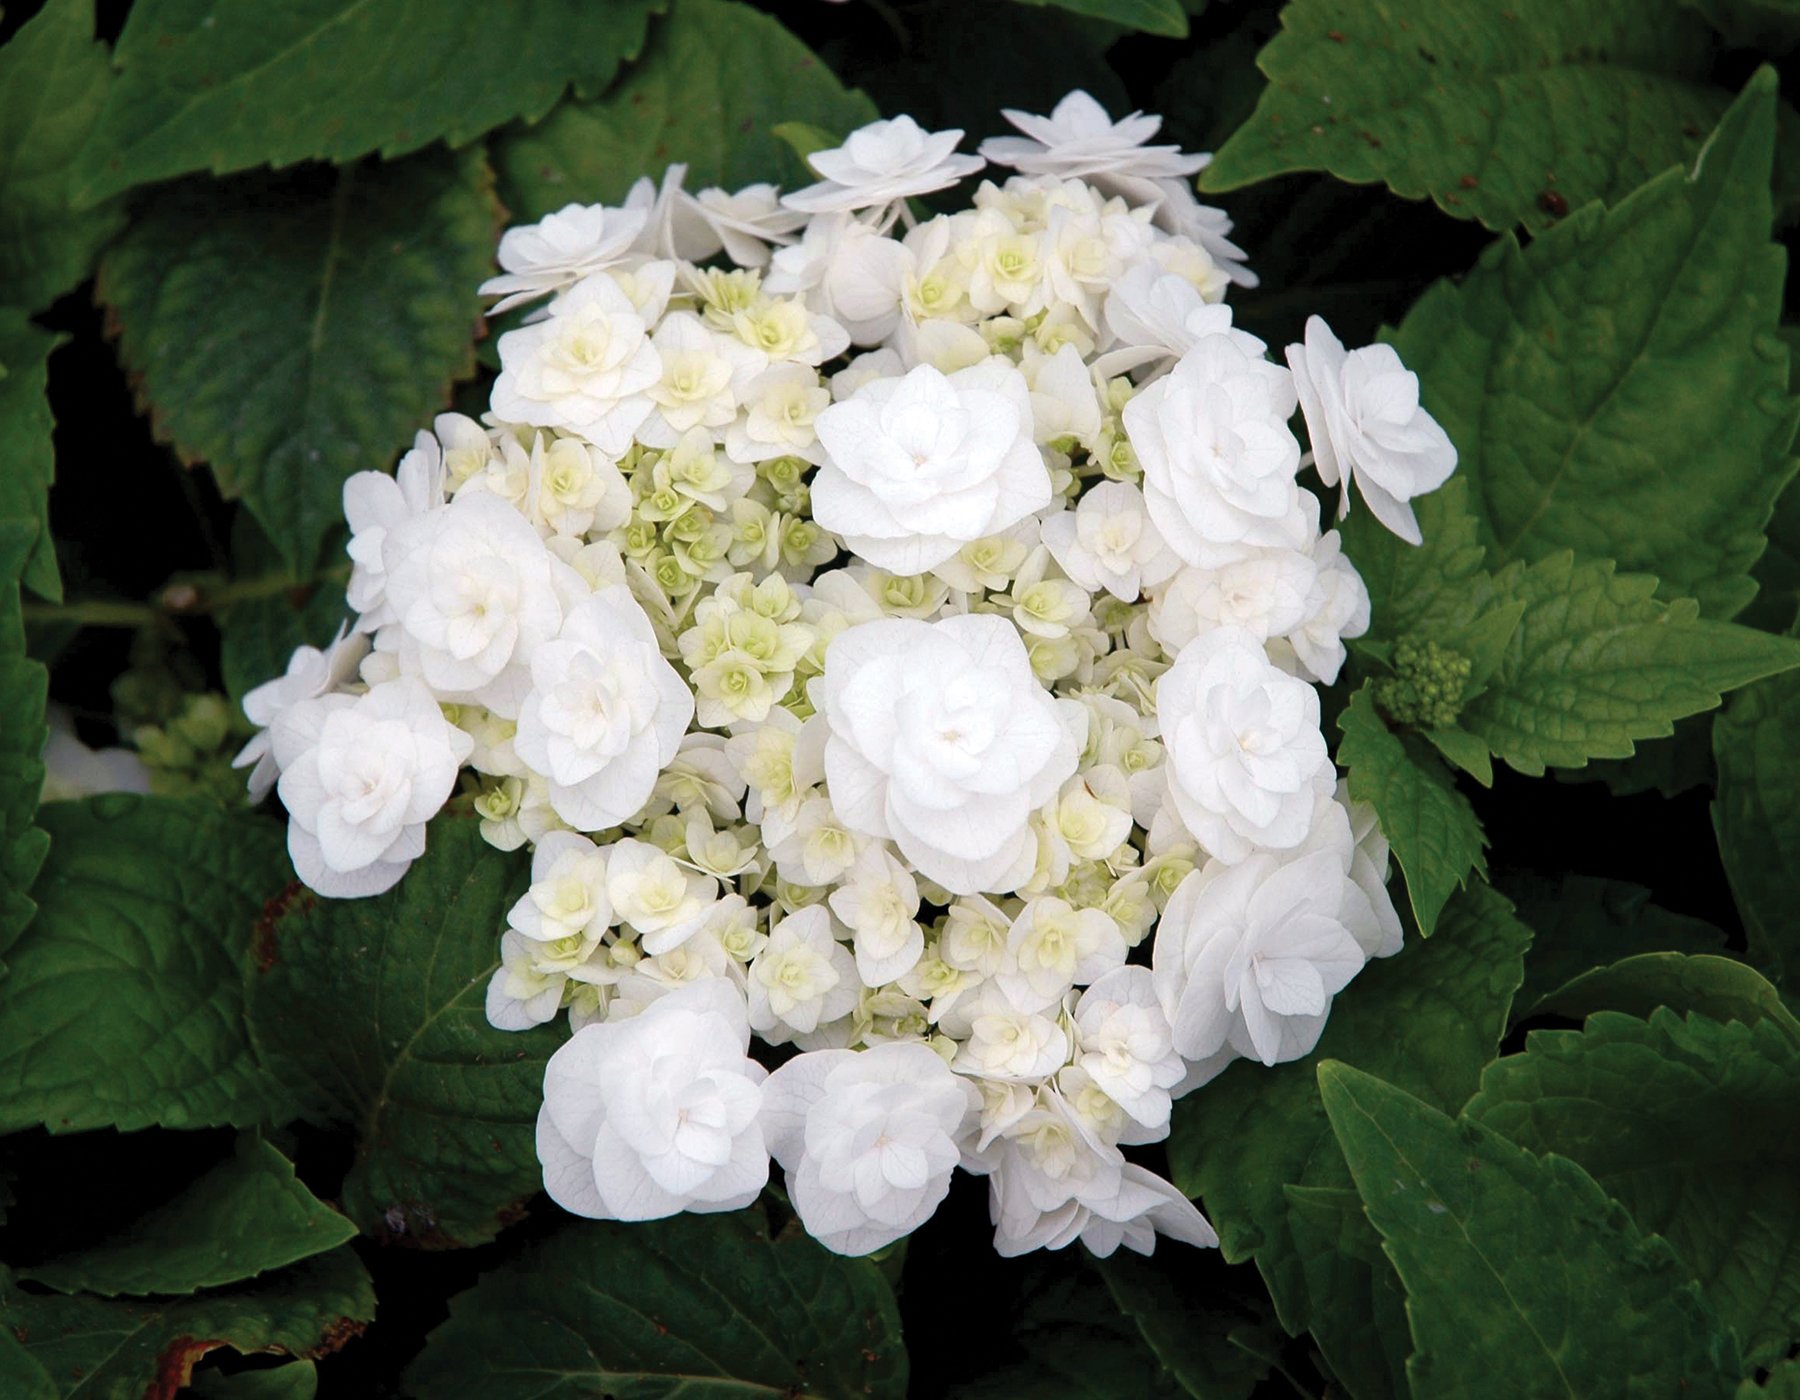 Wedding Gown hydrangeas: Double the flower power | Ministry of the fence